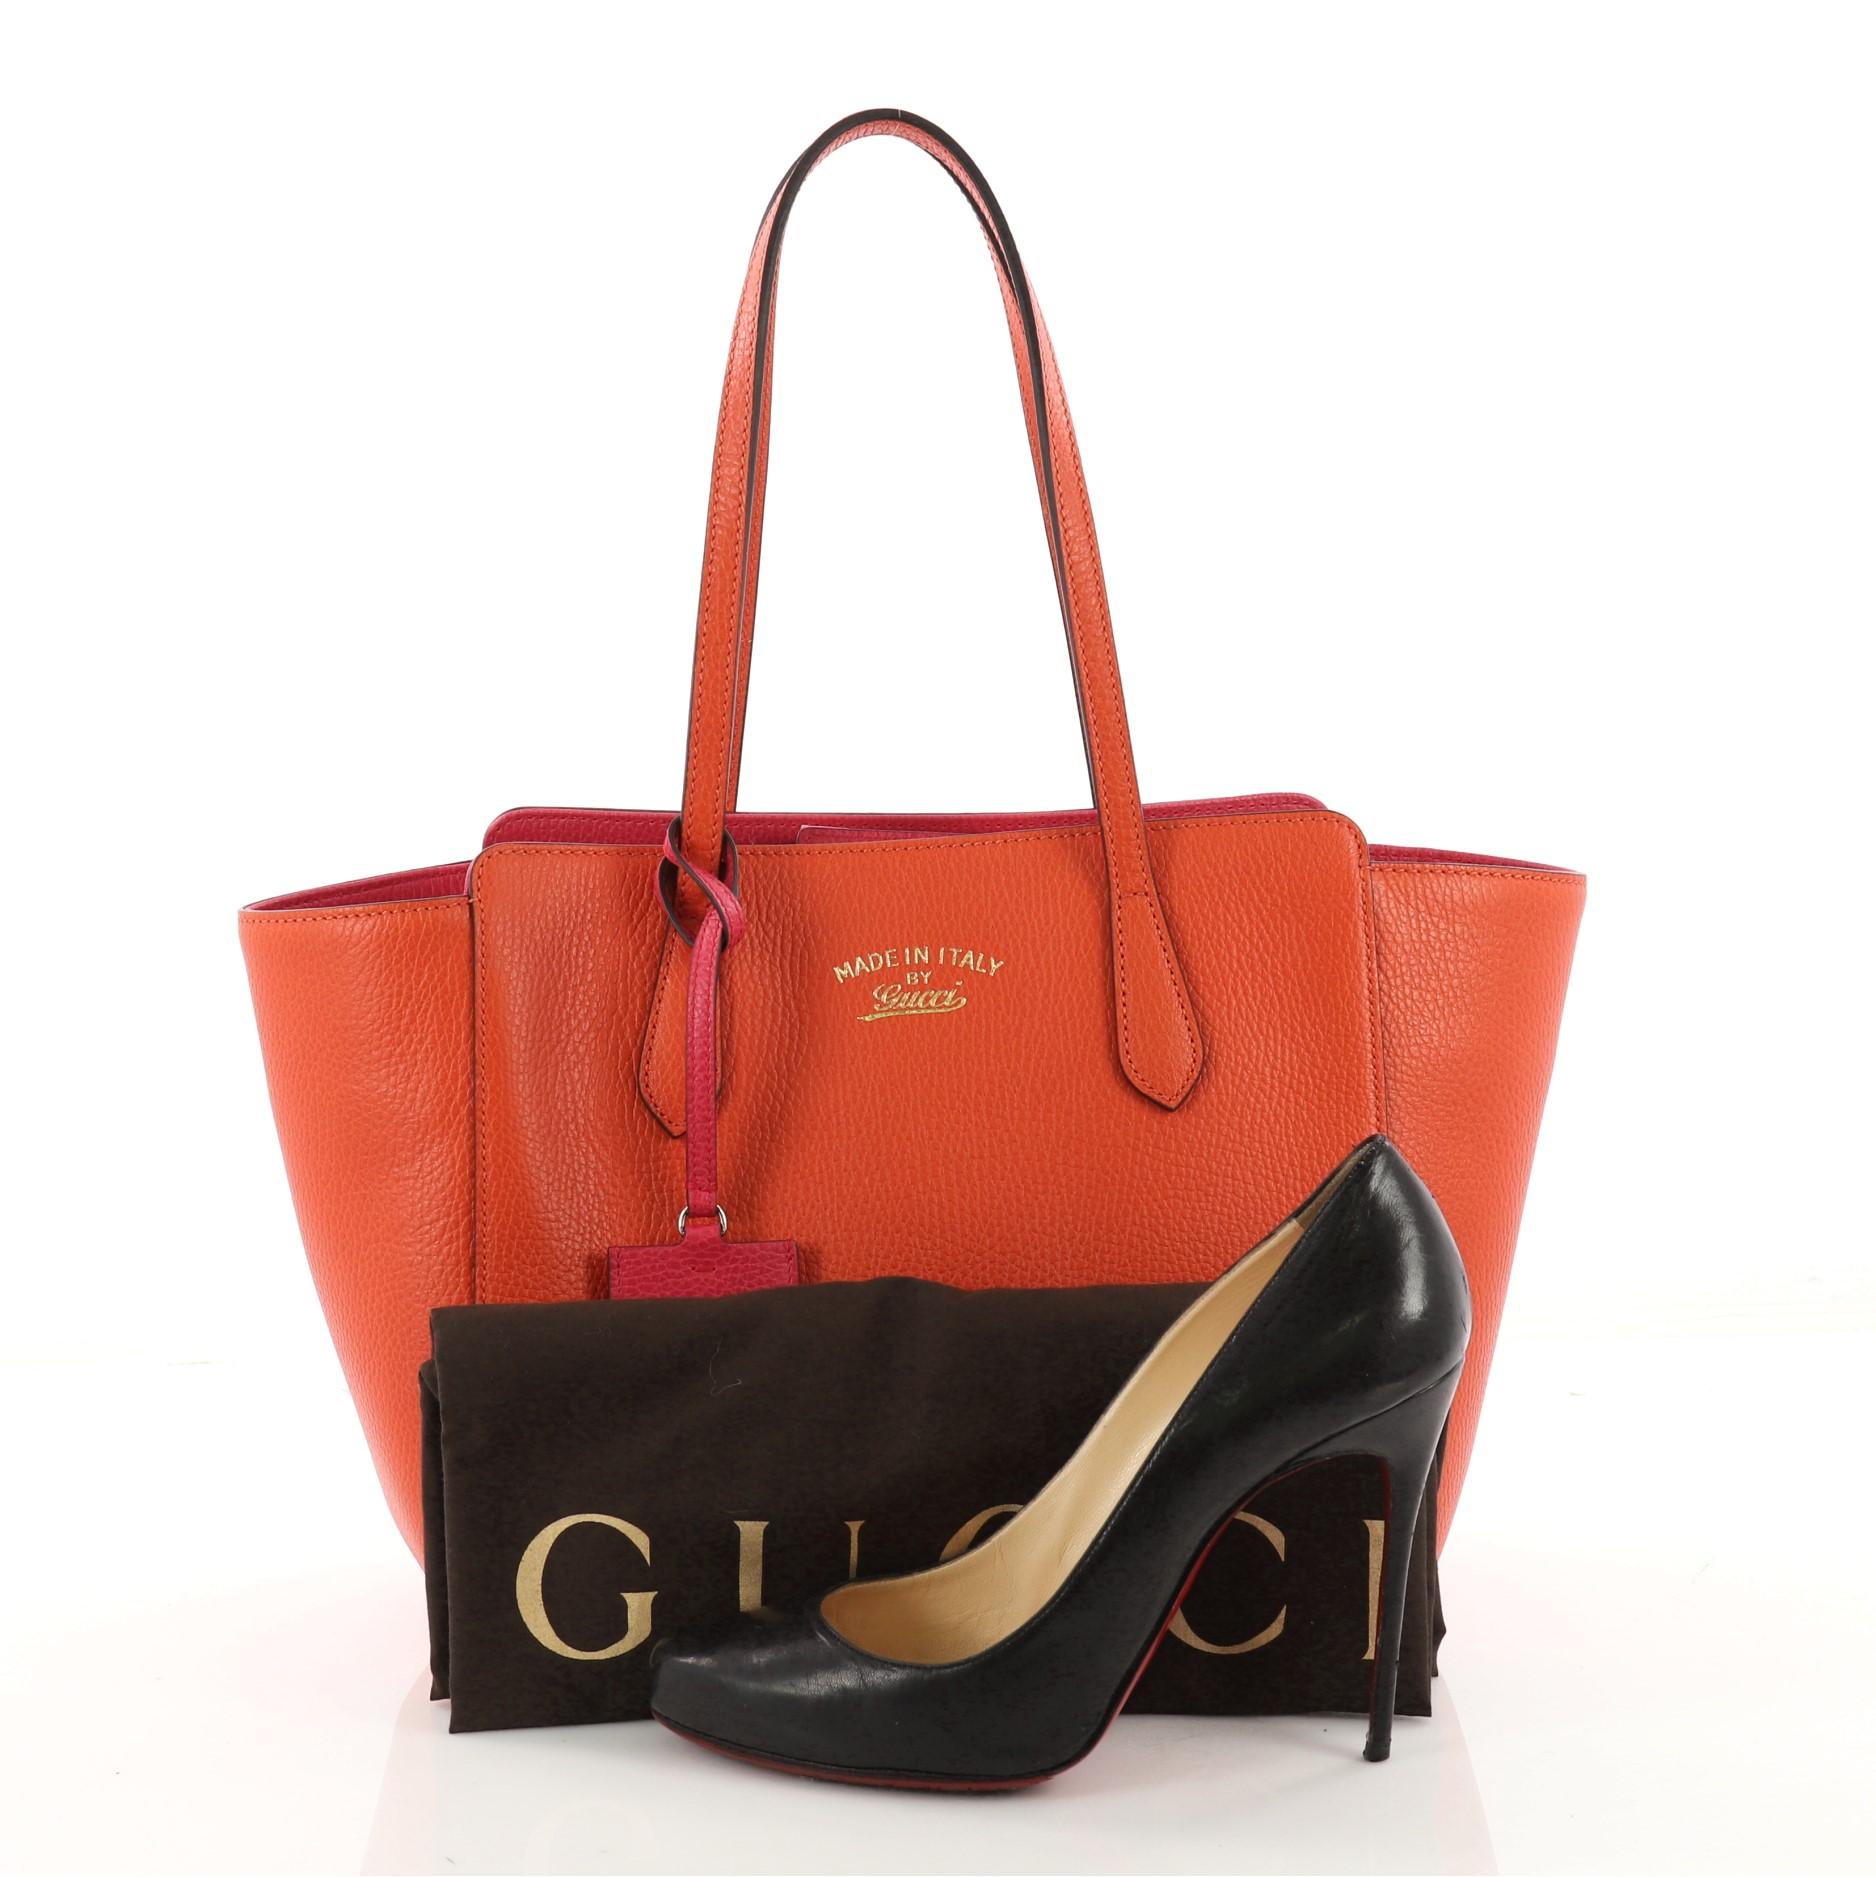 This authentic Gucci Swing Tote Leather Small is modern and sophisticated in design. Crafted in orange leather, this elegant tote features tall dual-slim handles, Gucci stamped logo at the front, expanded wing silhouette, and gold-tone hardware